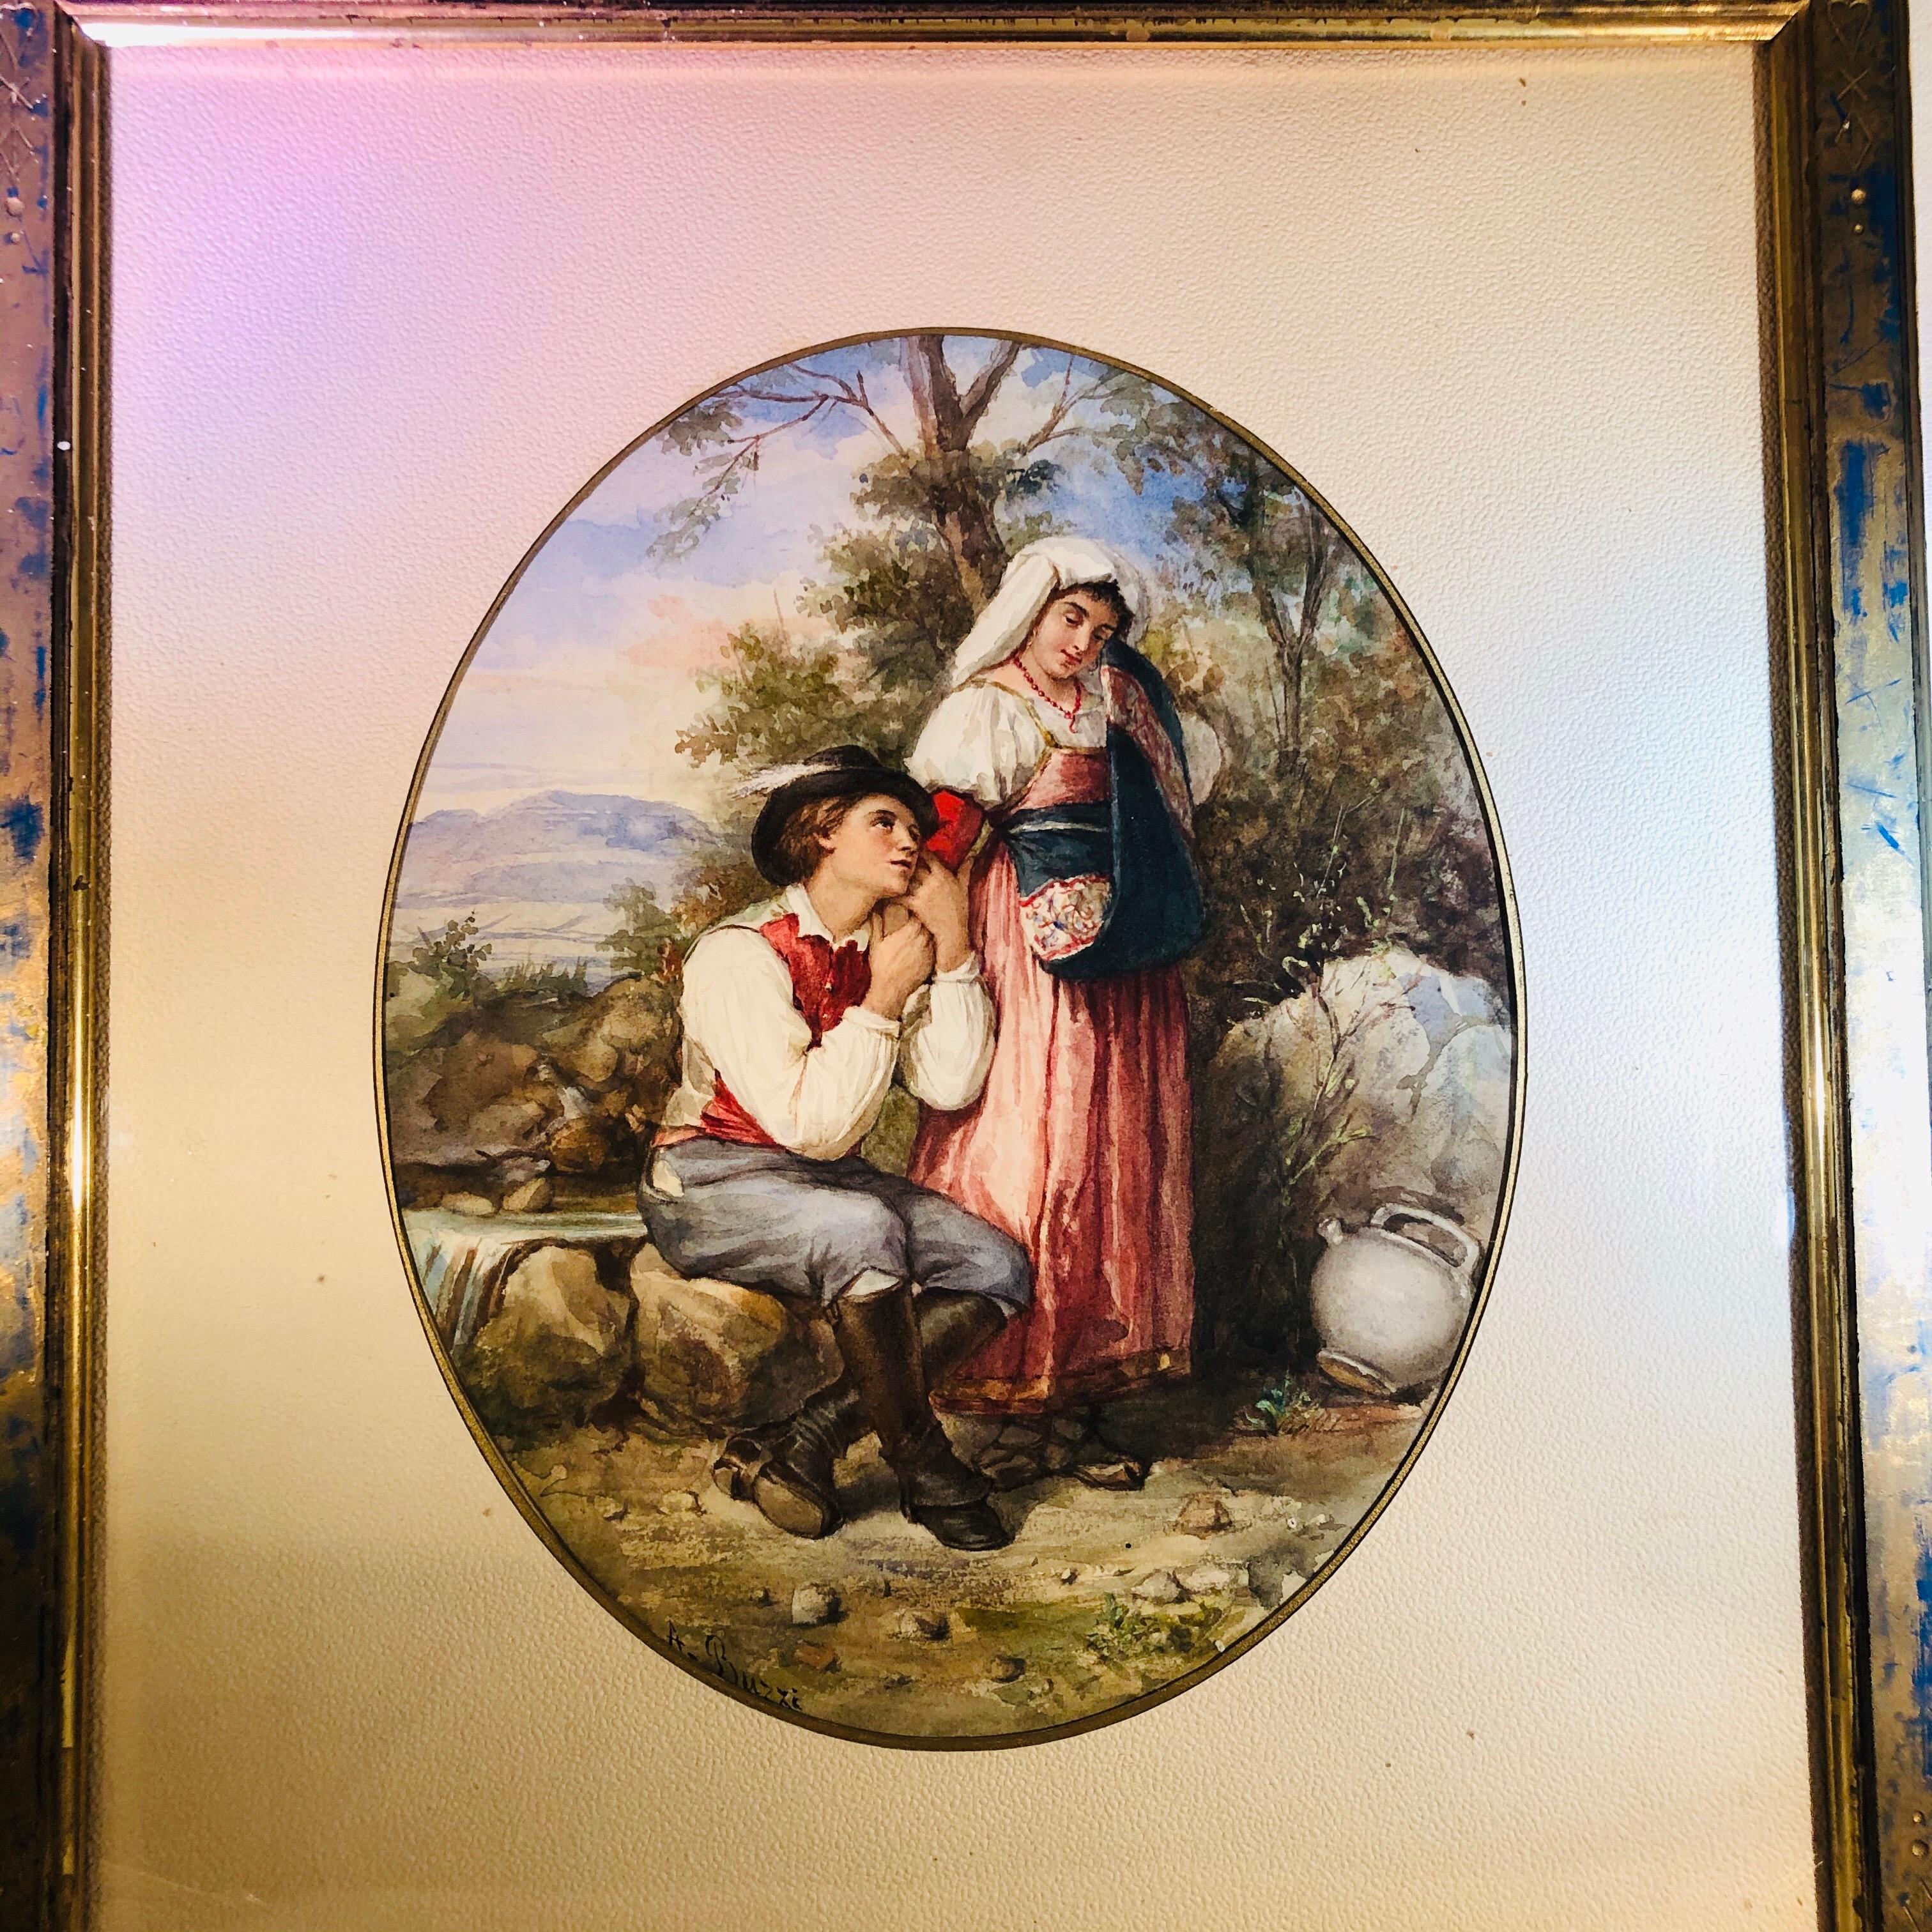 Watercolor painting depicting lovers in the woods signed A. Buzzi. Archille Buzzi is a well listed artist who lived in Italy in the late 19th century. This wonderful watercolor has vibrant colors and detailed artistry. The romantic subject is very